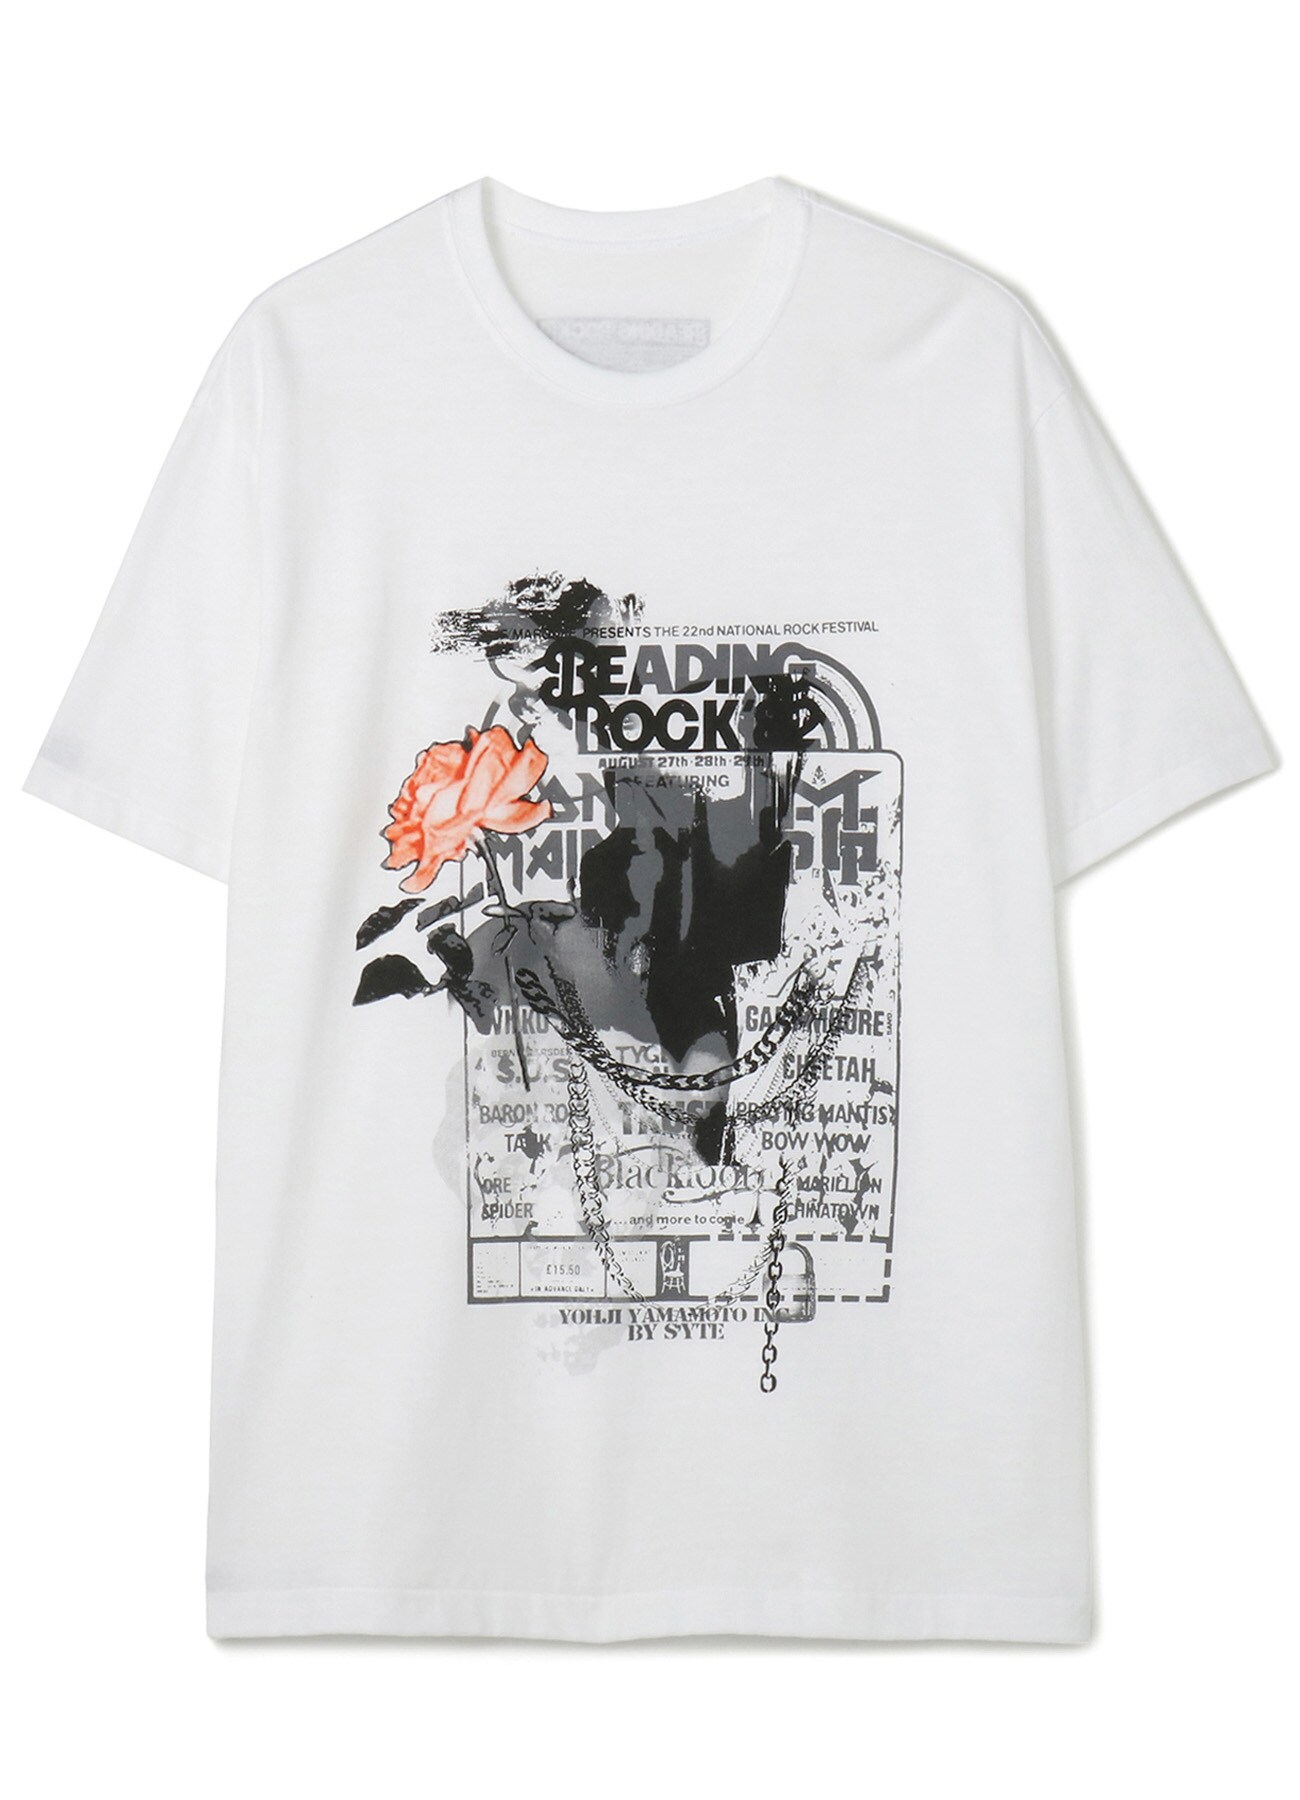 S'YTE × 1982 Original Reading Rock Festival With a woman Rose T-shirt